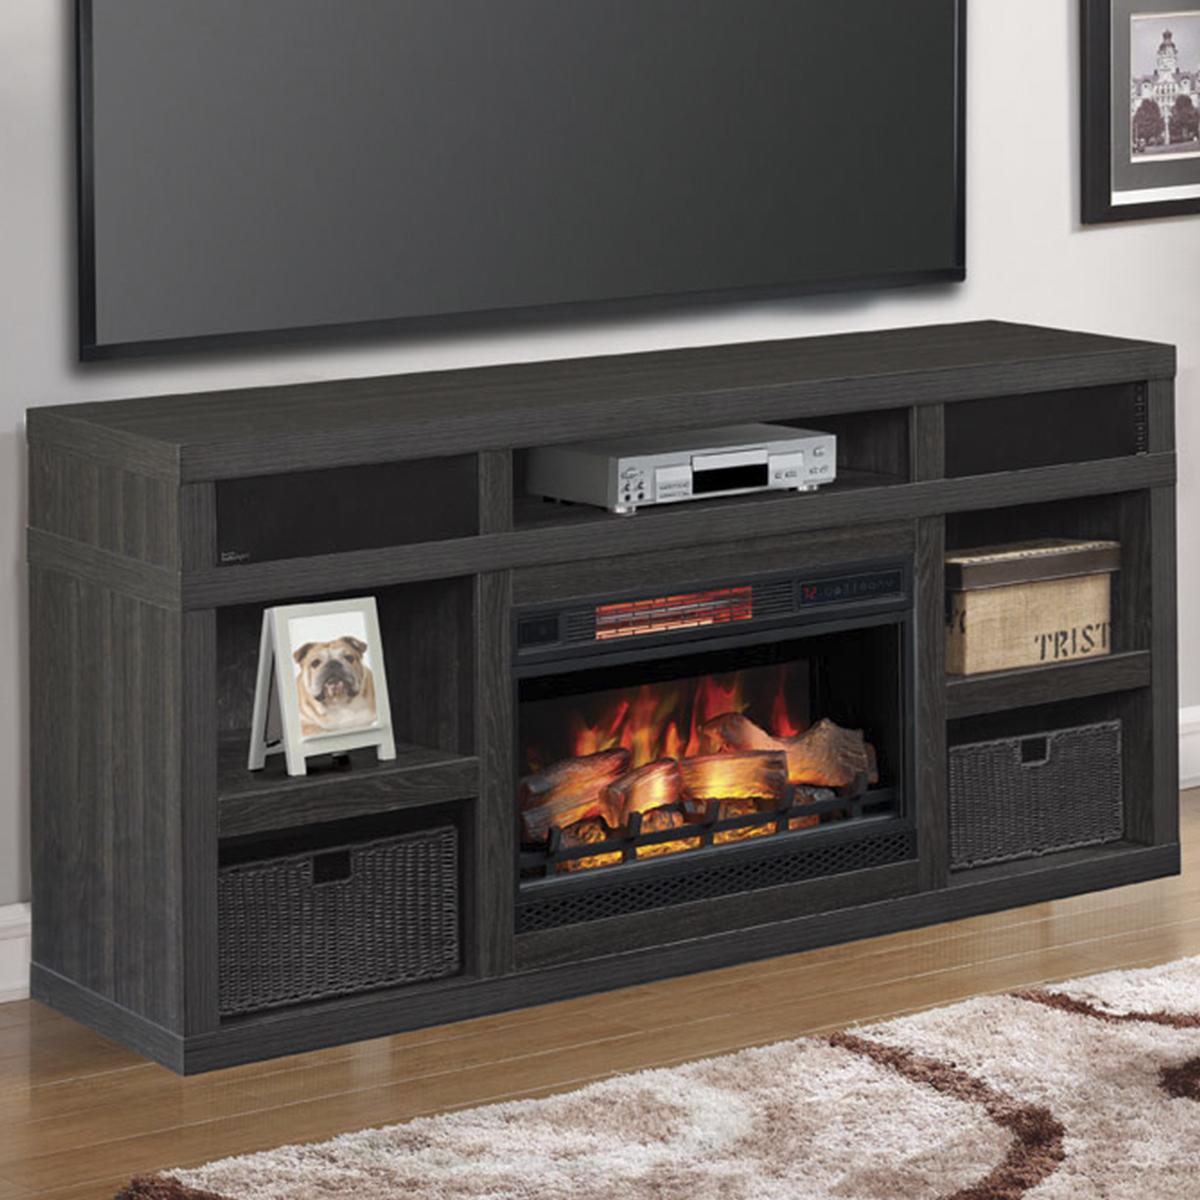 Solid Wood Entertainment Center with Fireplace Beautiful Fabio Flames Greatlin 64" Tv Stand In Black Walnut